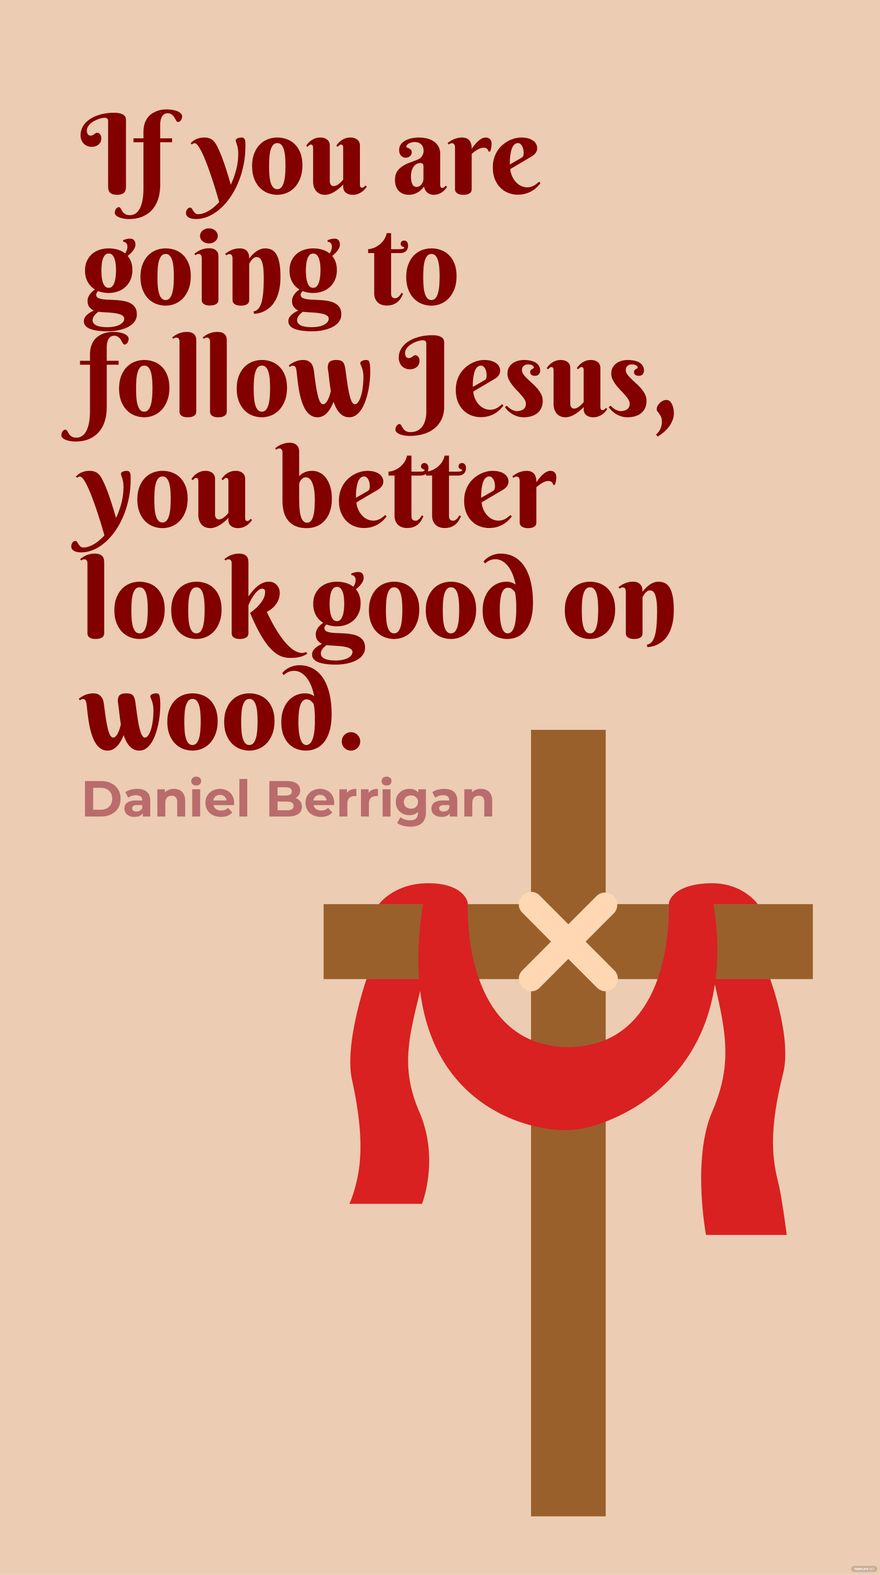 Free Daniel Berrigan - If you are going to follow Jesus, you better look good on wood.